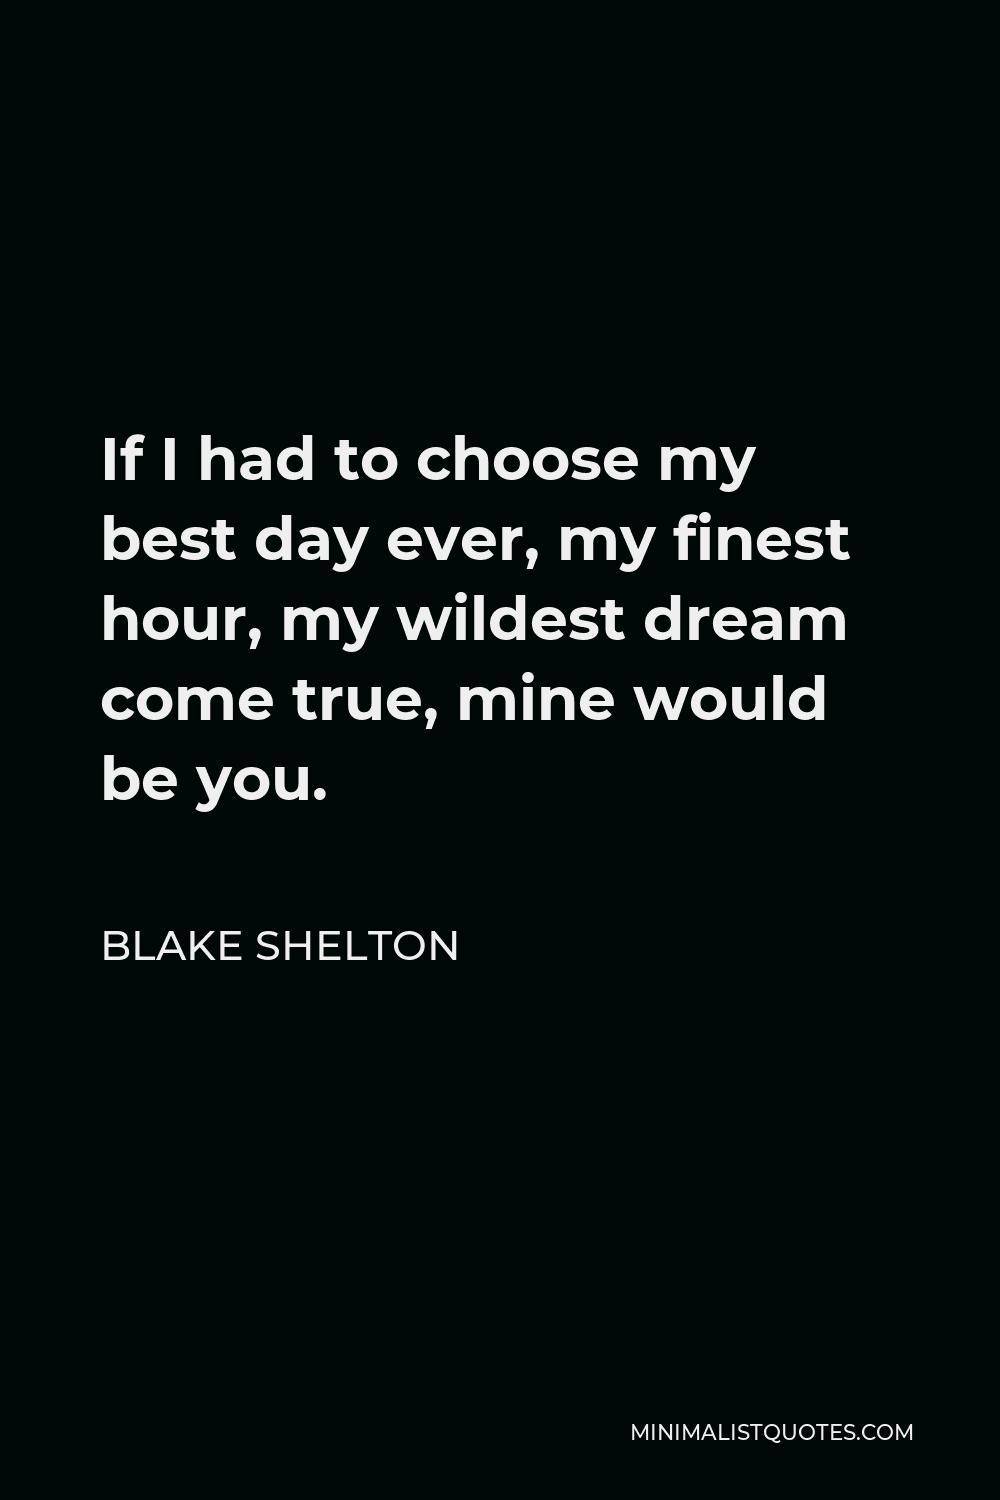 Blake Shelton Quote - If I had to choose my best day ever, my finest hour, my wildest dream come true, mine would be you.